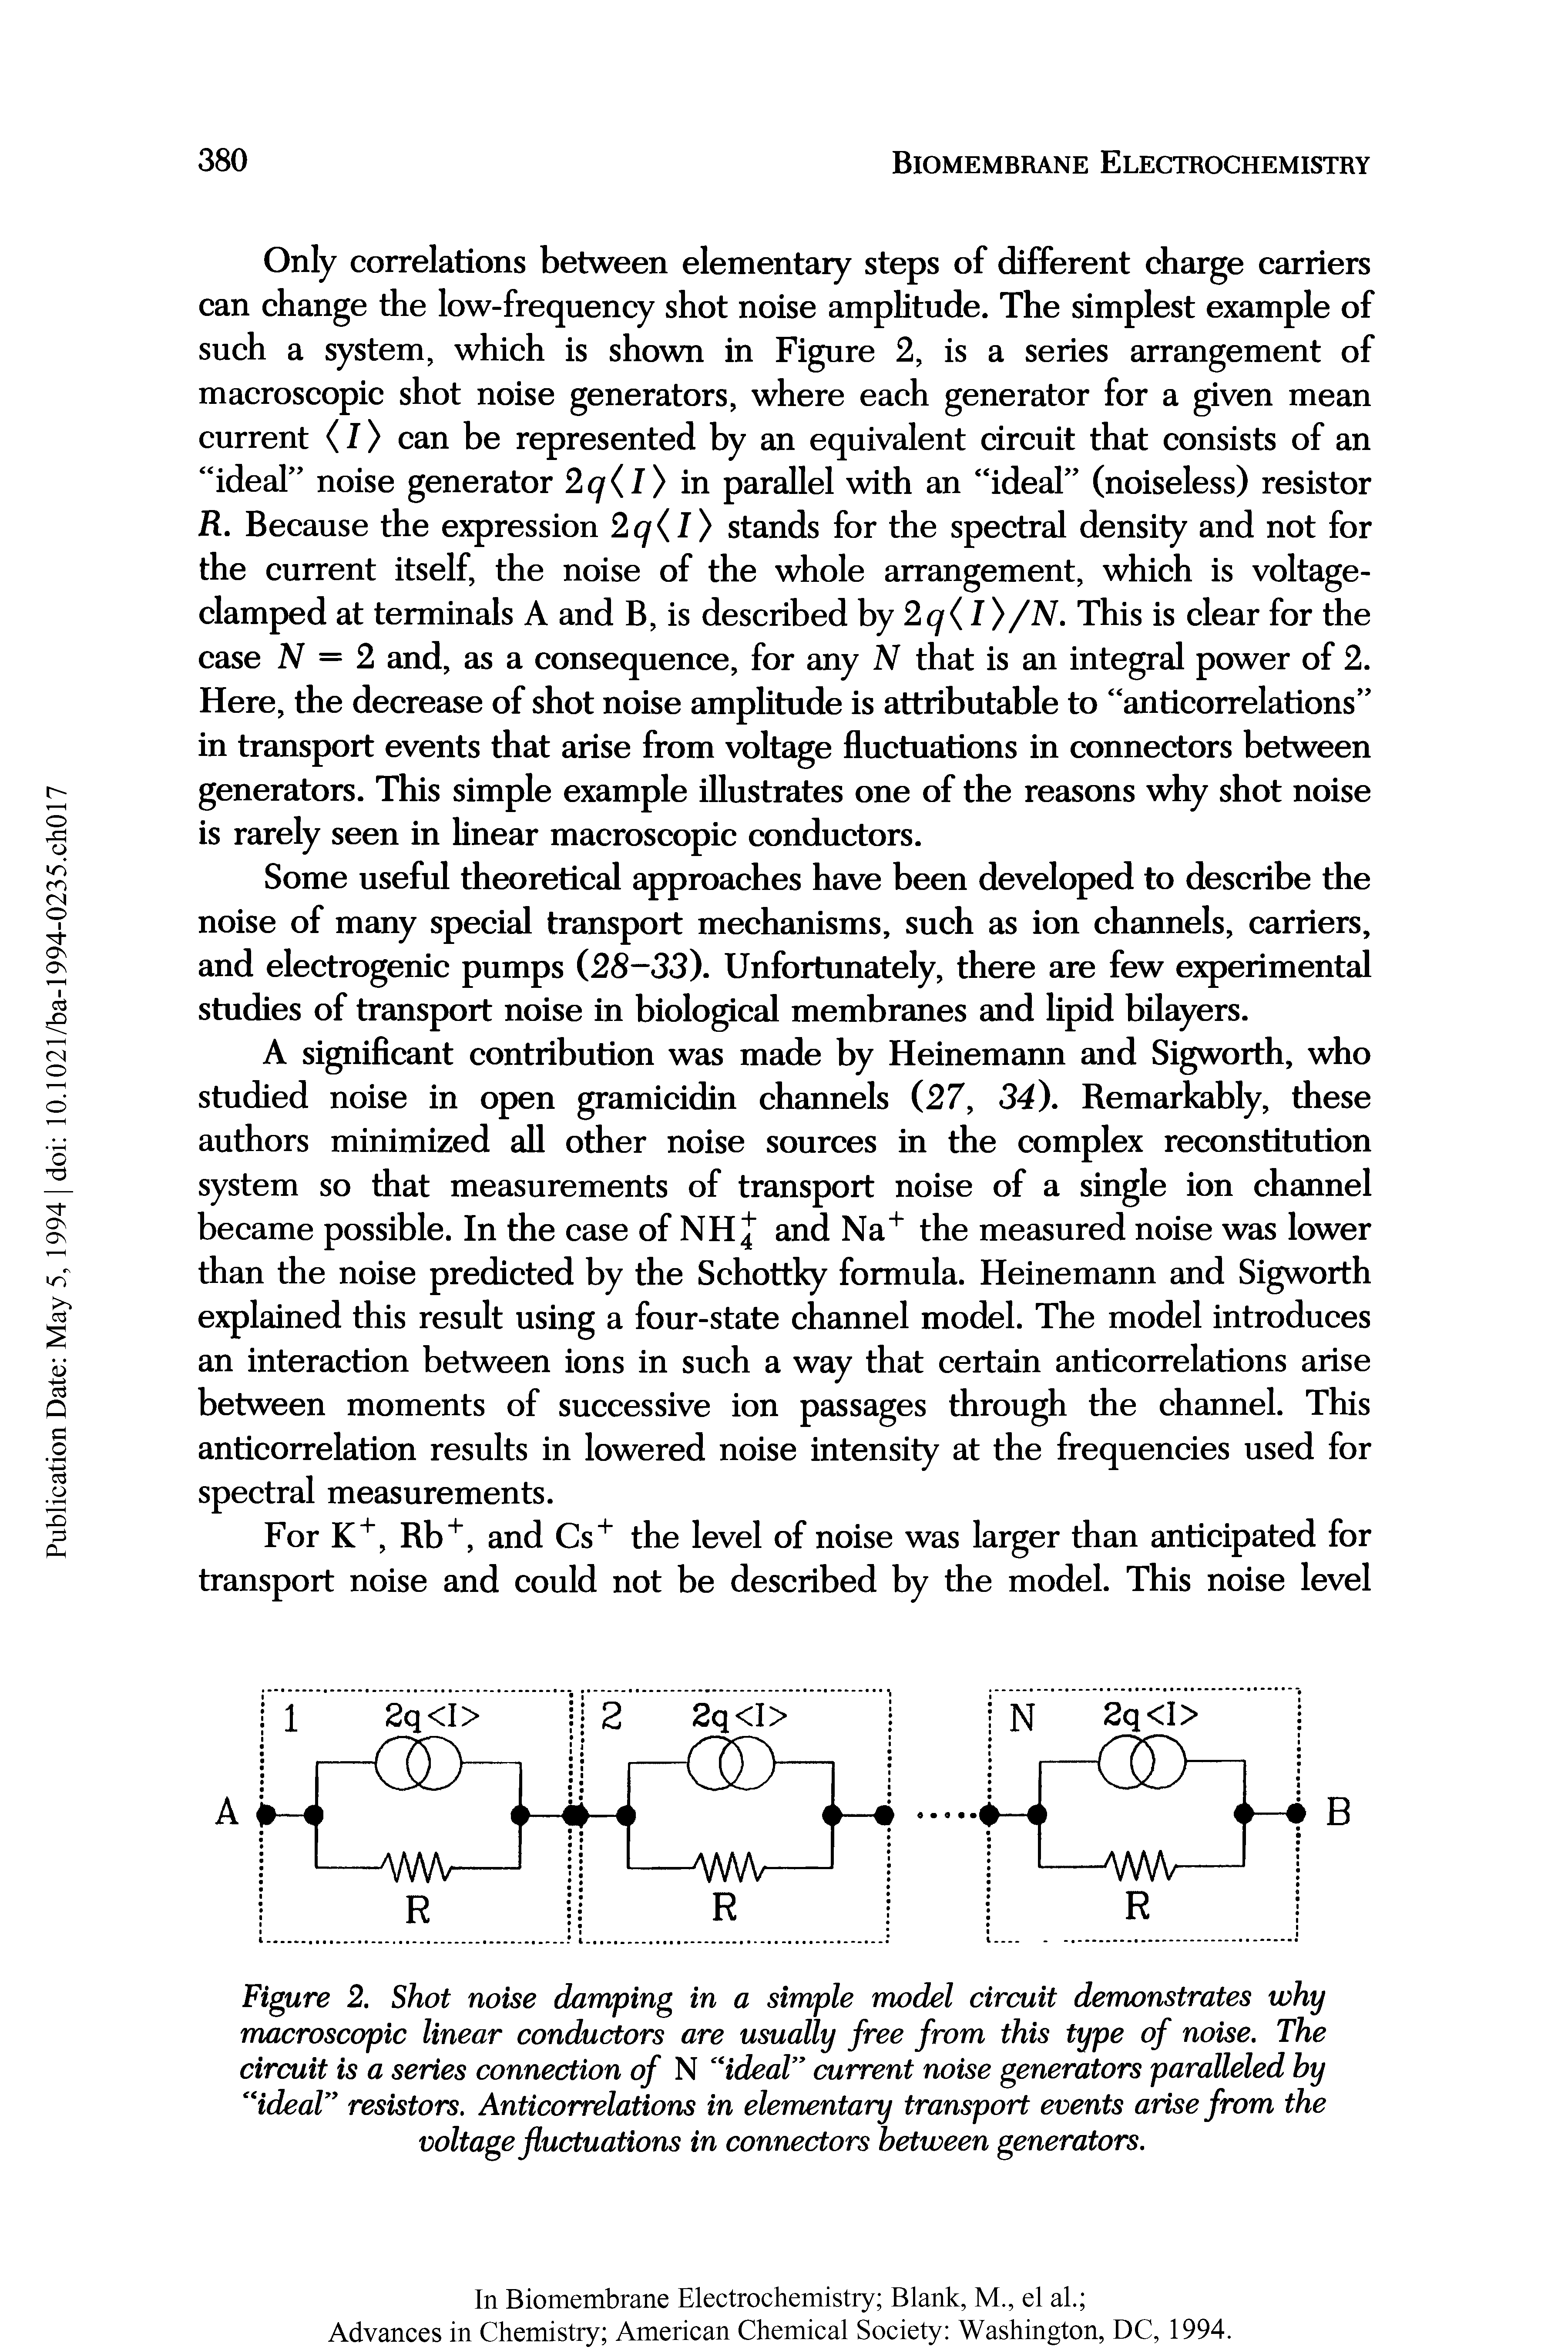 Figure 2. Shot noise damping in a simple model circuit demonstrates why macroscopic linear conductors are usually free from this type of noise. The circuit is a series connection of N ideal current noise generators paralleled by ideal resistors. Anticorrelations in elementary transport events arise from the voltage fluctuations in connectors between generators.